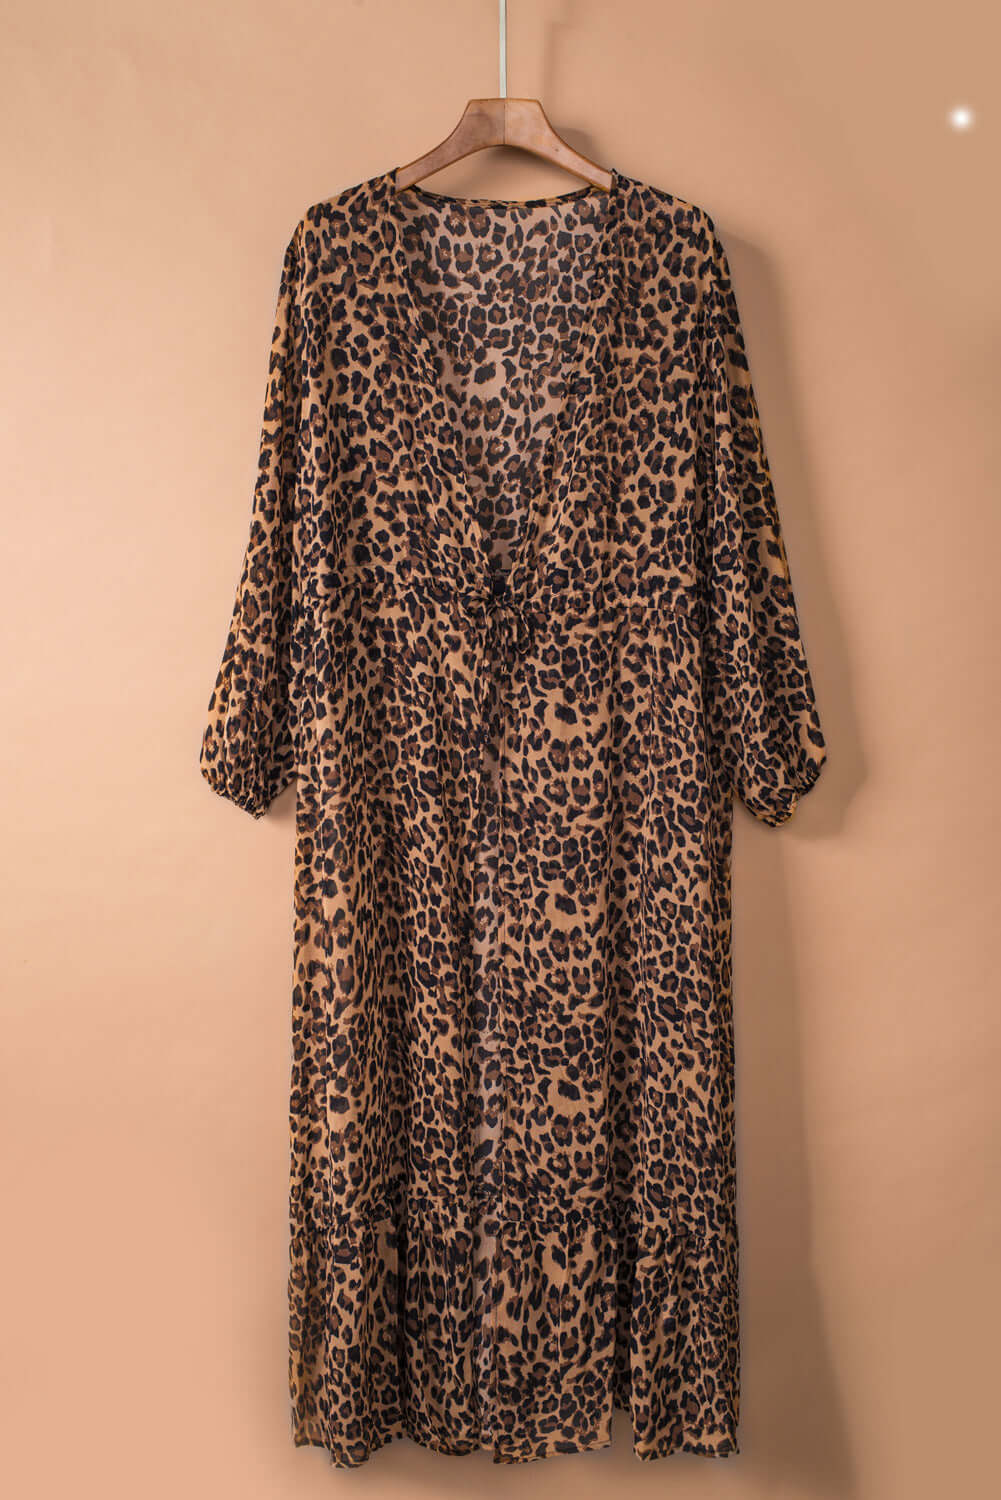 BELLA ROAD Leopard Open Front Long Sleeve Cover Up at Bella Road